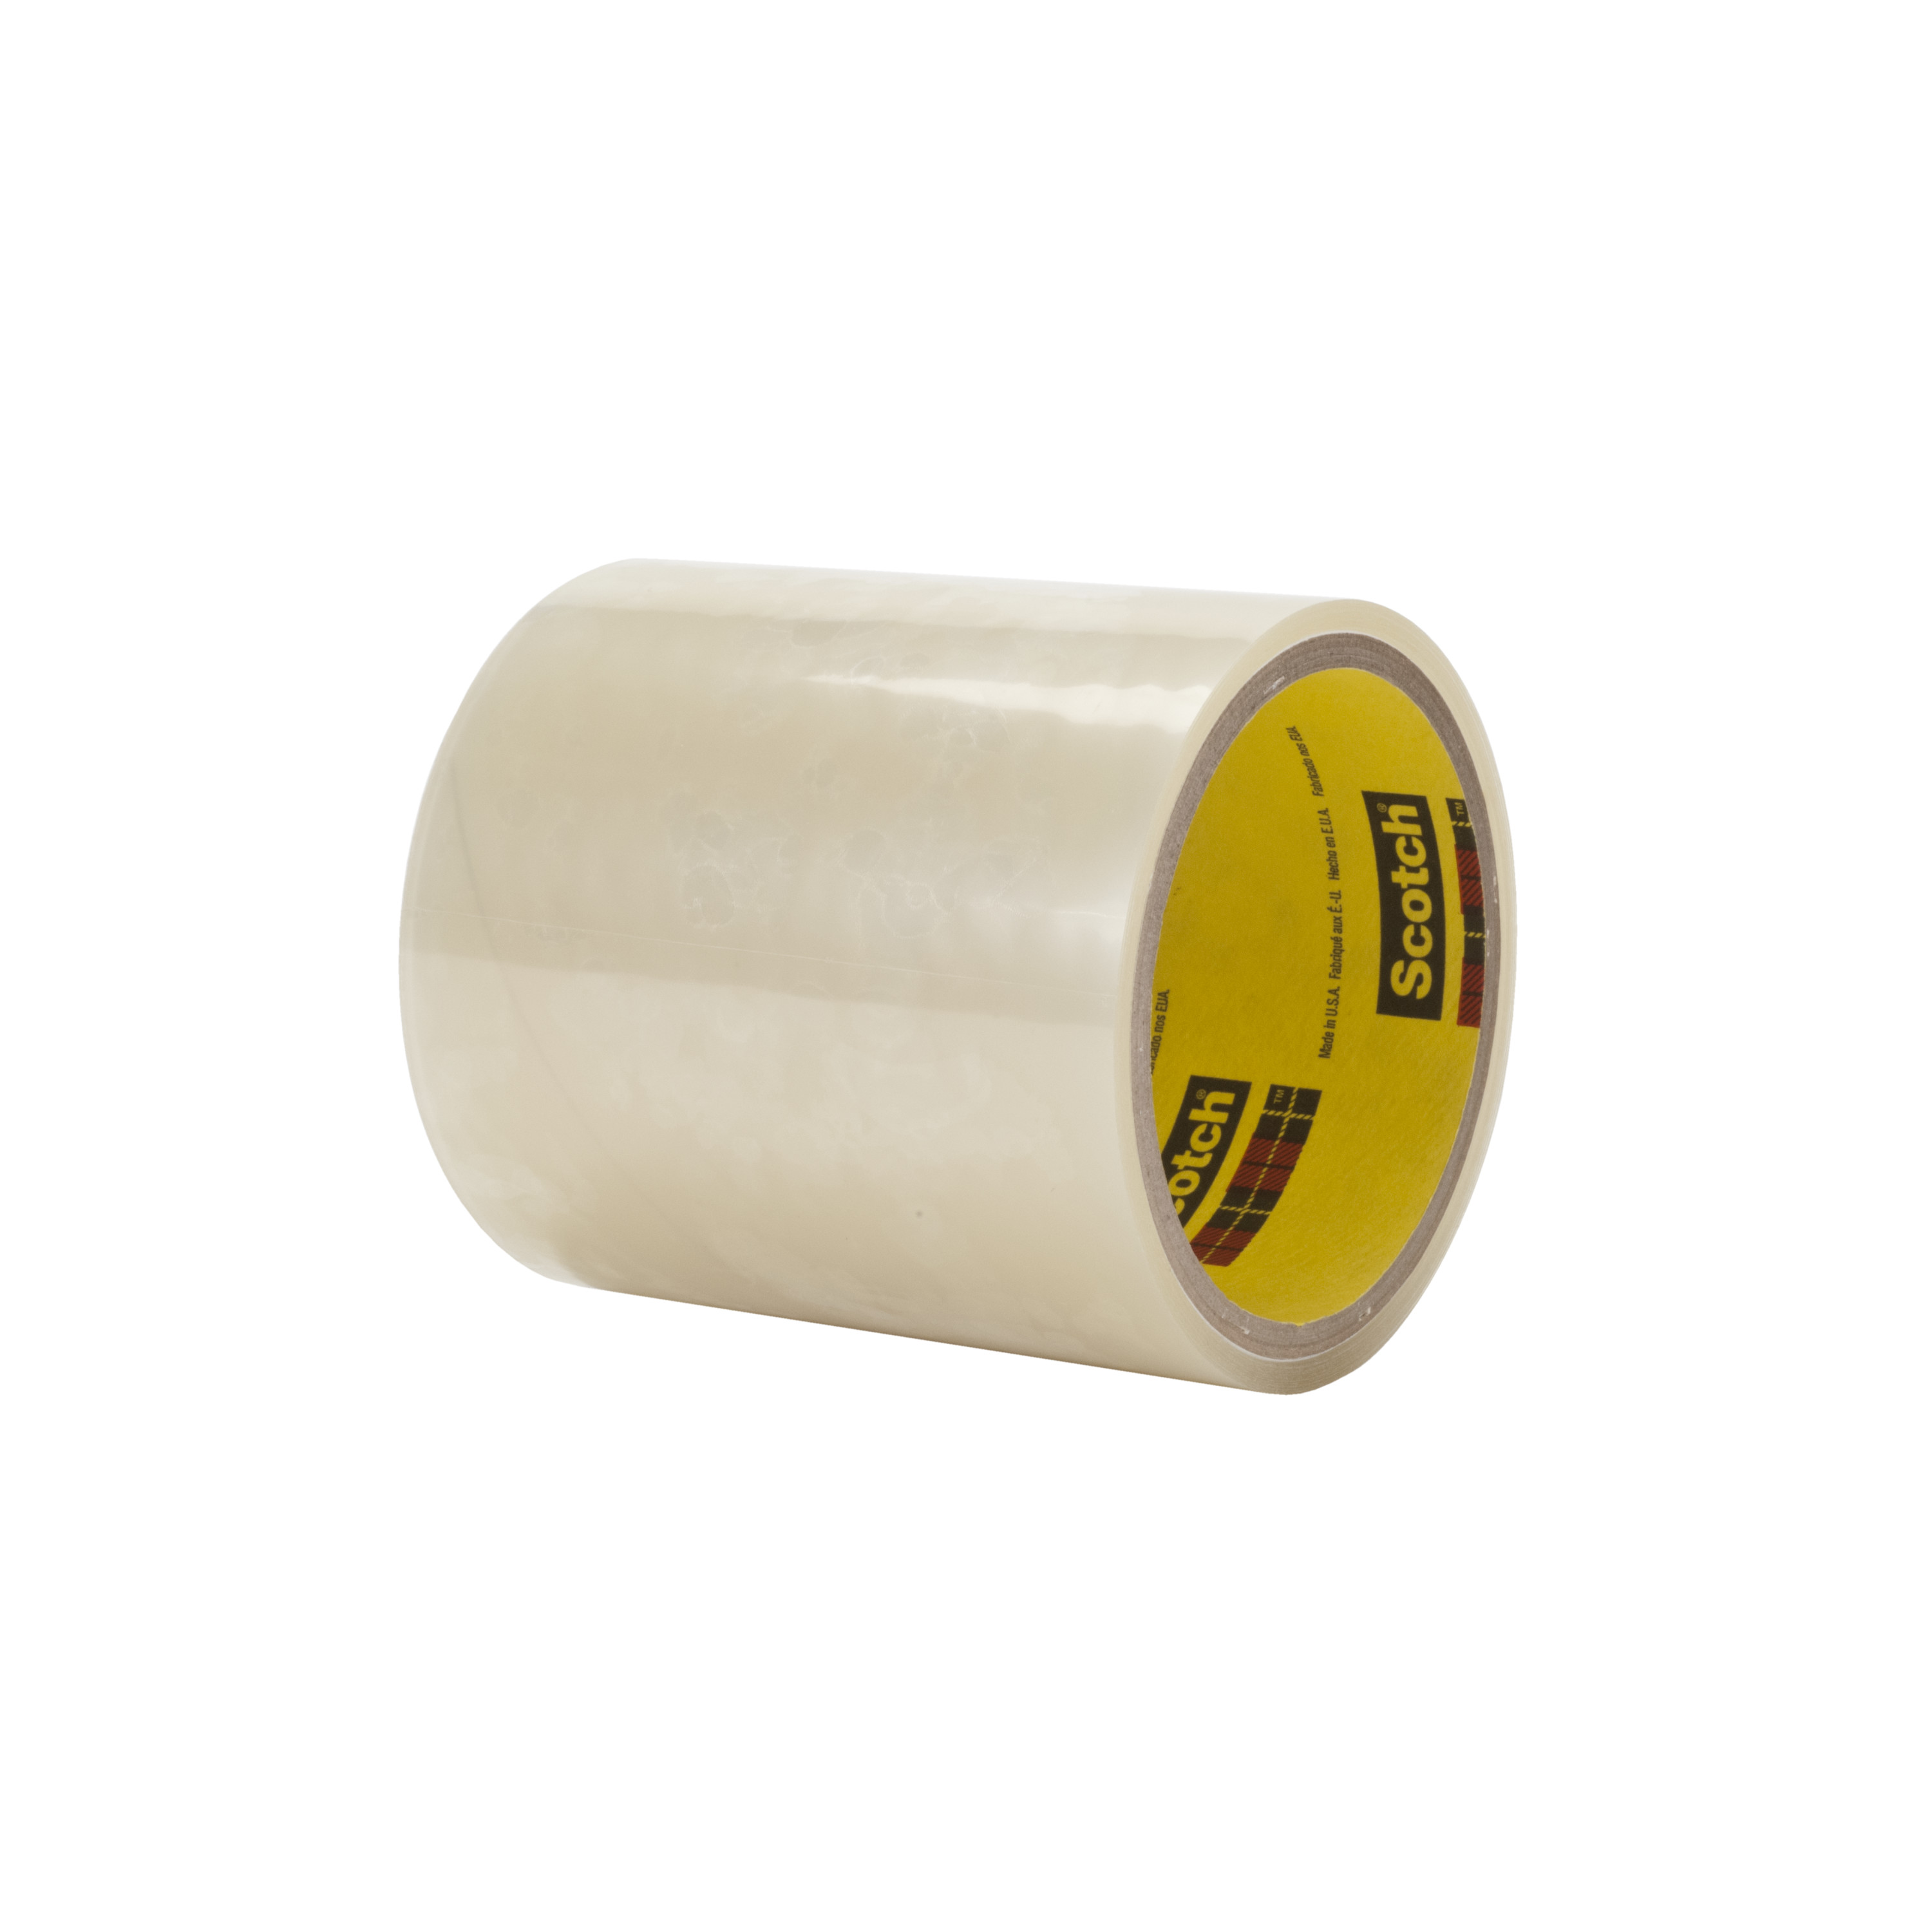 3M™ Adhesive Transfer Tape 467MC, Clear, 48 in x 60 yd, 2 mil, 1 roll
per case